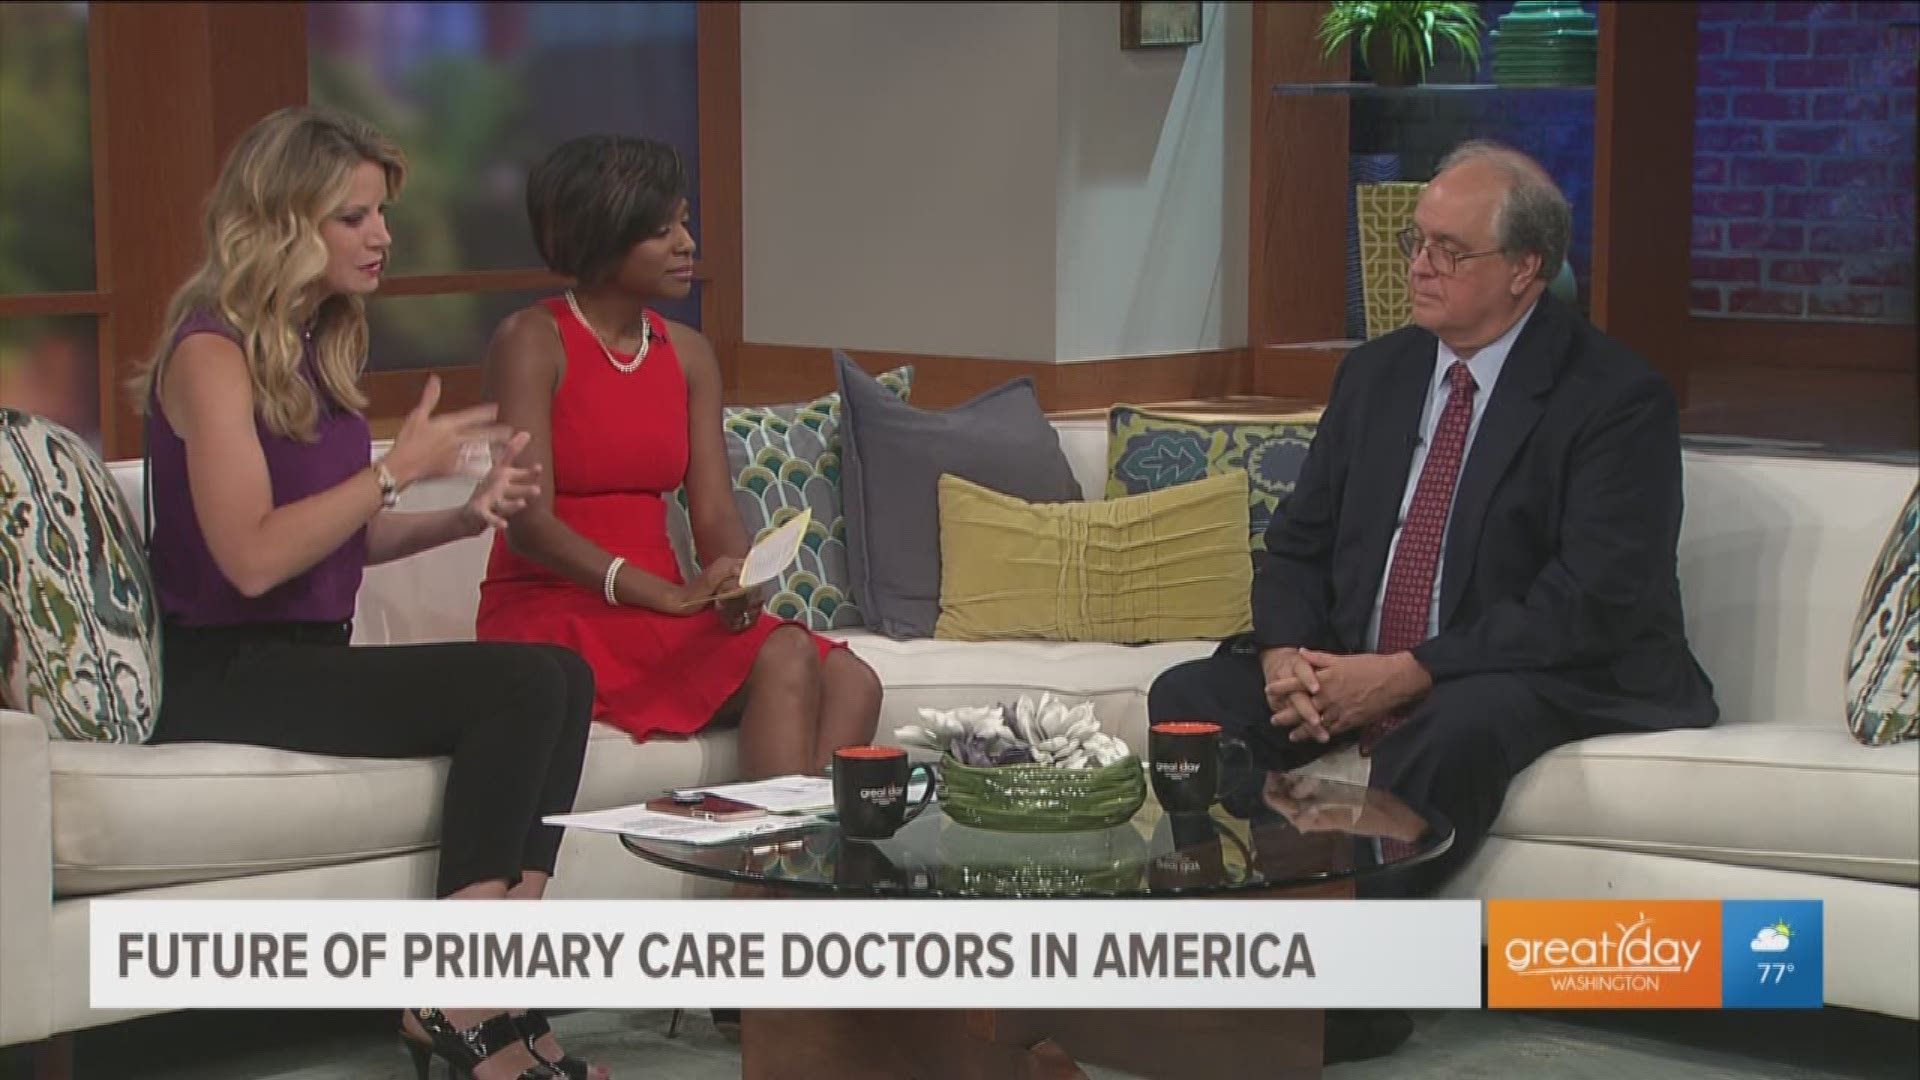 According to the Association of American Medical Colleges, the nation will be short up to 50,000 primary care doctors by 2030. Dr. G. Richard Olds, President of St. George's University Medical School explains.